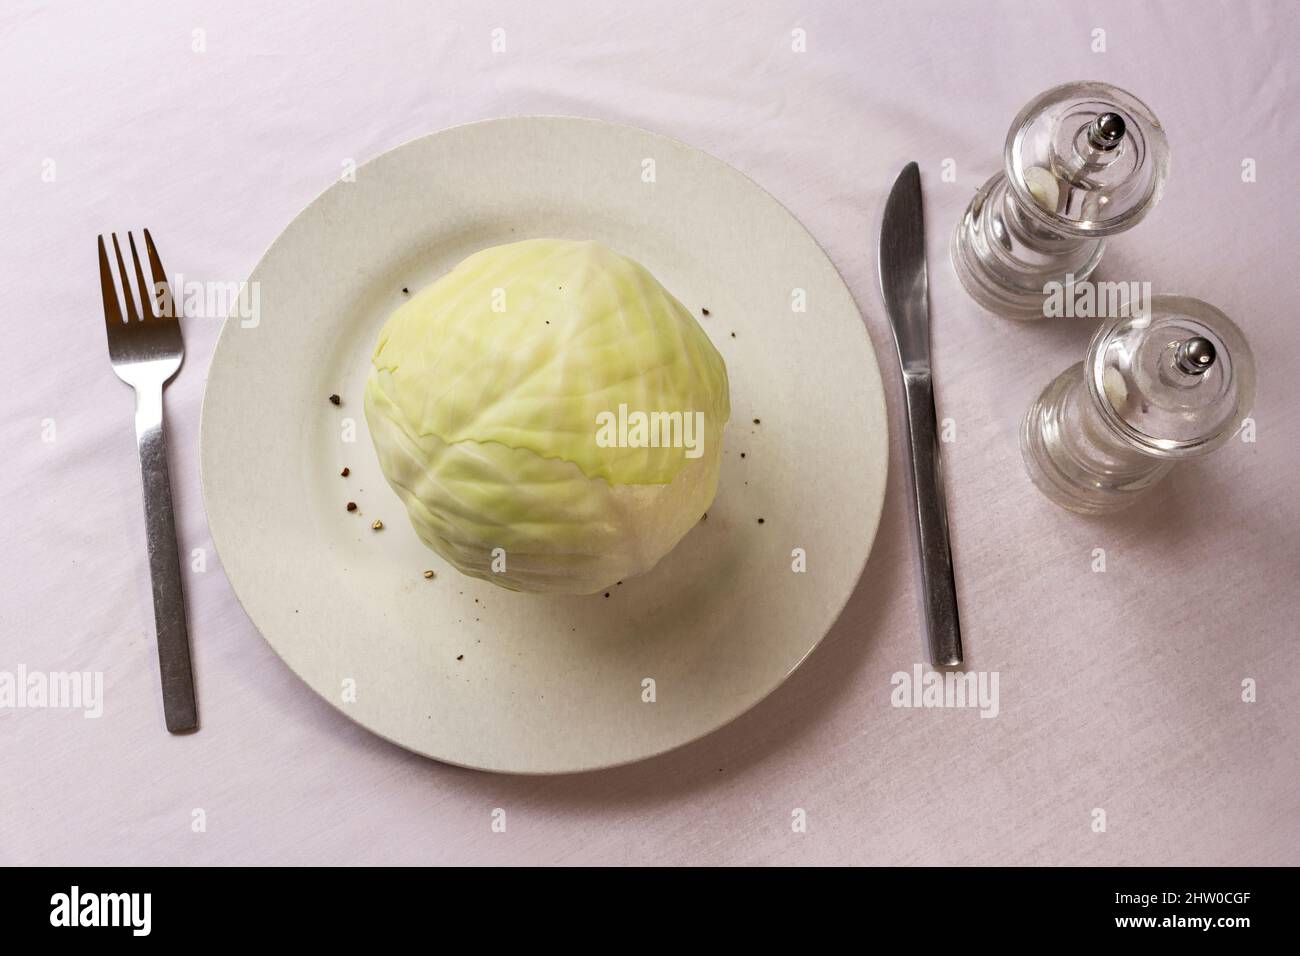 Overhead shot of a a whole white cabbage on white plate with knife and fork and salt and pepper, suggesting a frugal or boring diet Stock Photo